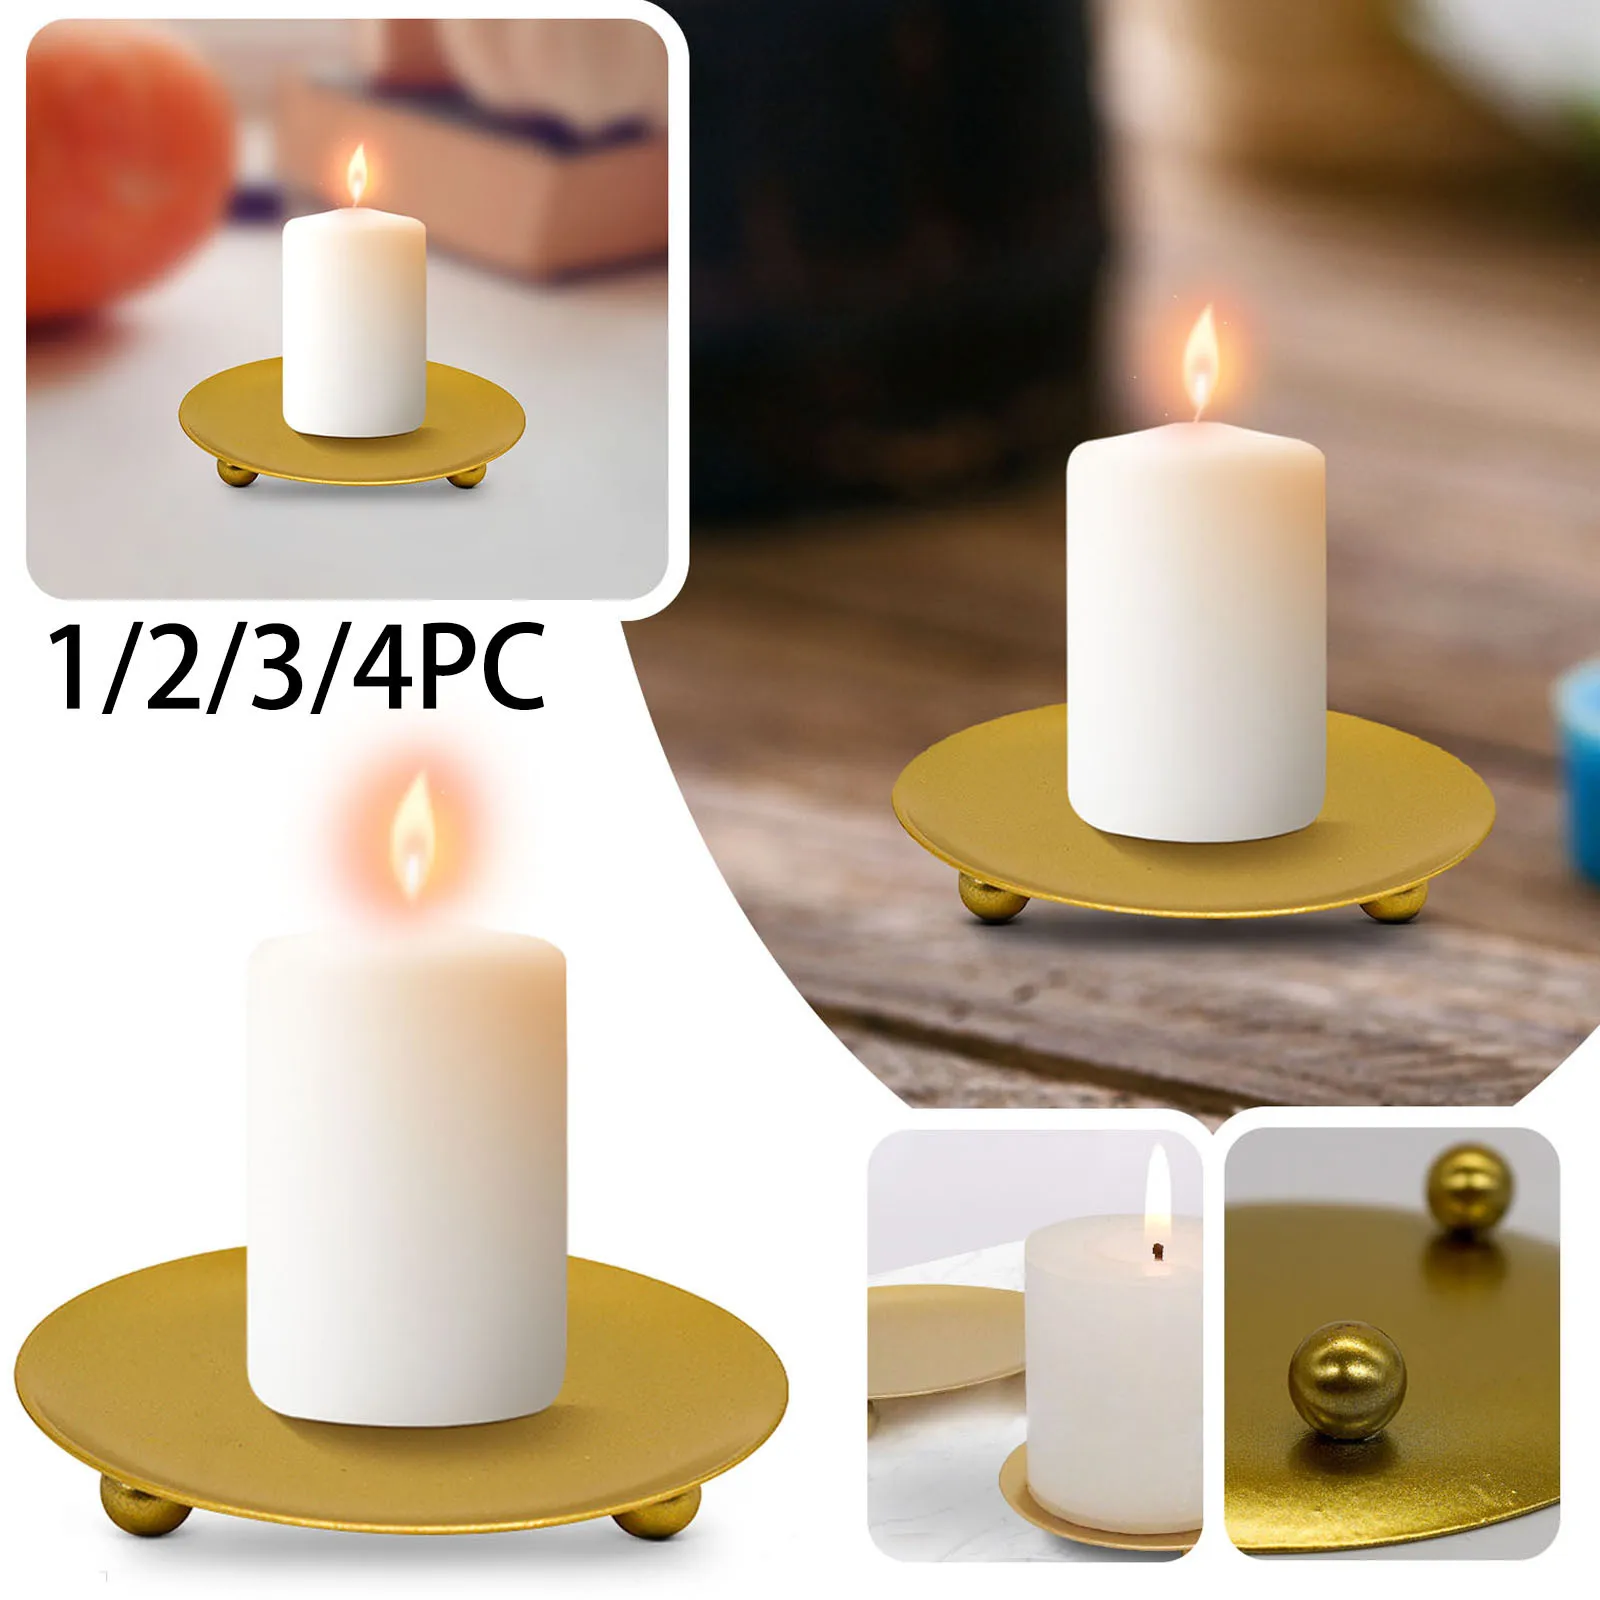 Geometric Round Wrought Iron Candlestick Desktop Decorative Ornaments Creative 9 Candle Holder for Fireplace for Centerpieces